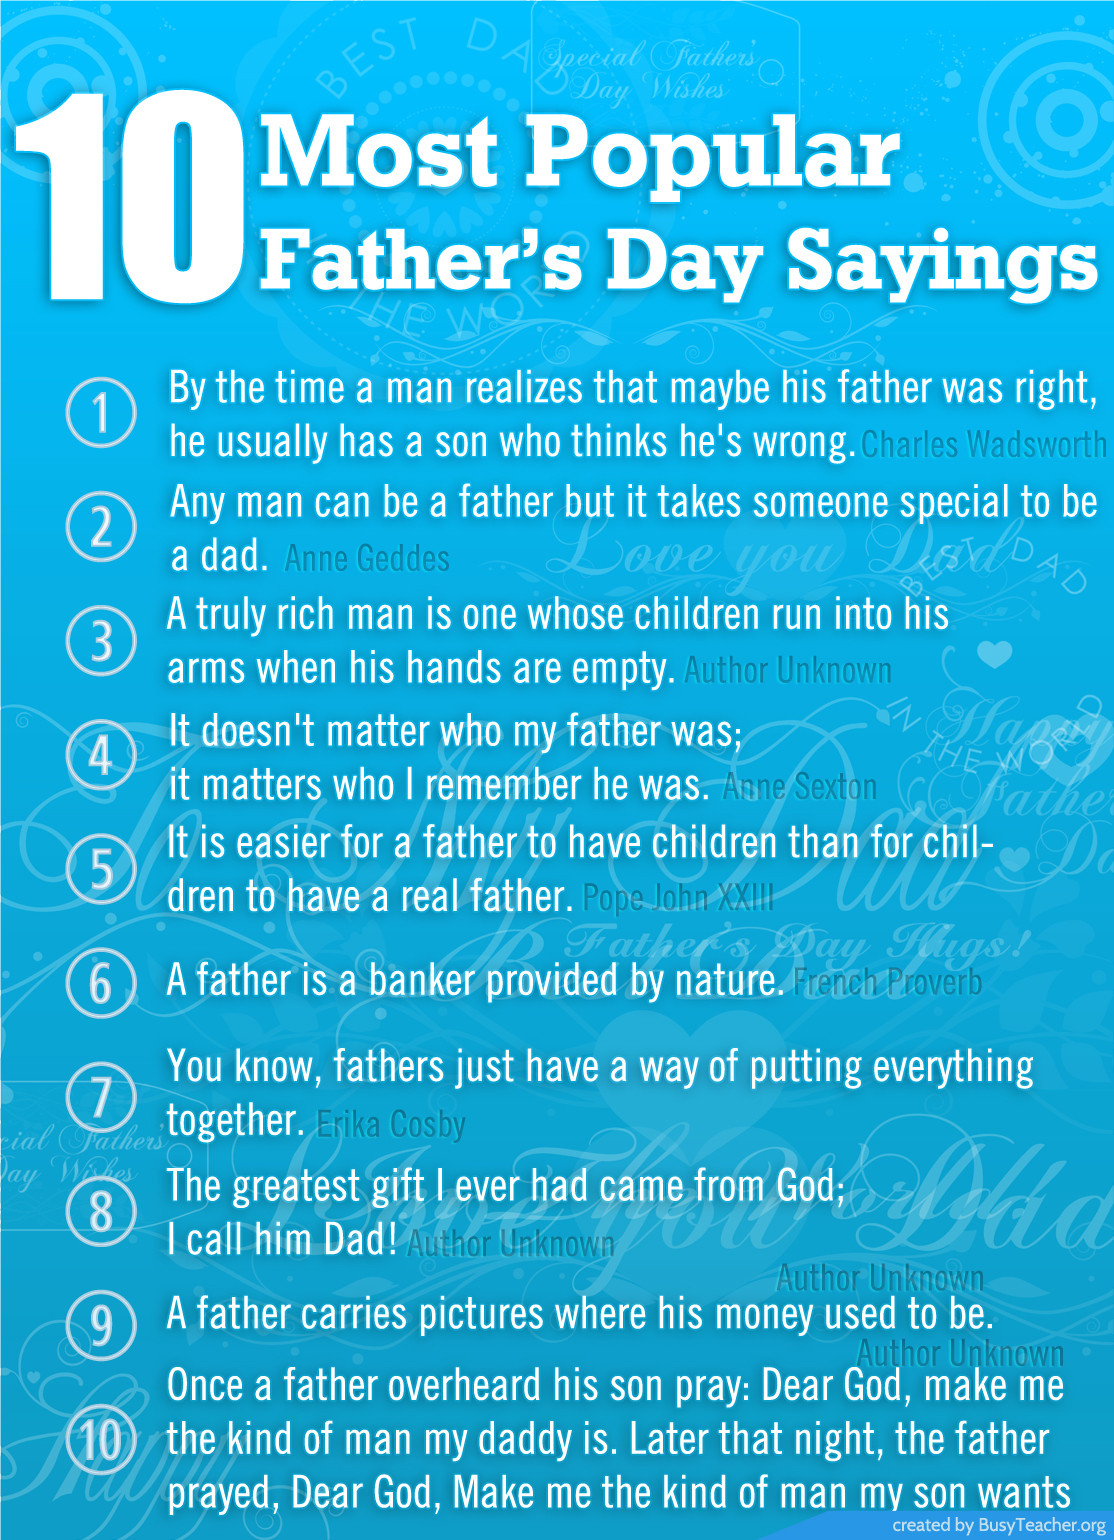 Quotes Fathers Day
 Ten Popular Father’s Day Quotes